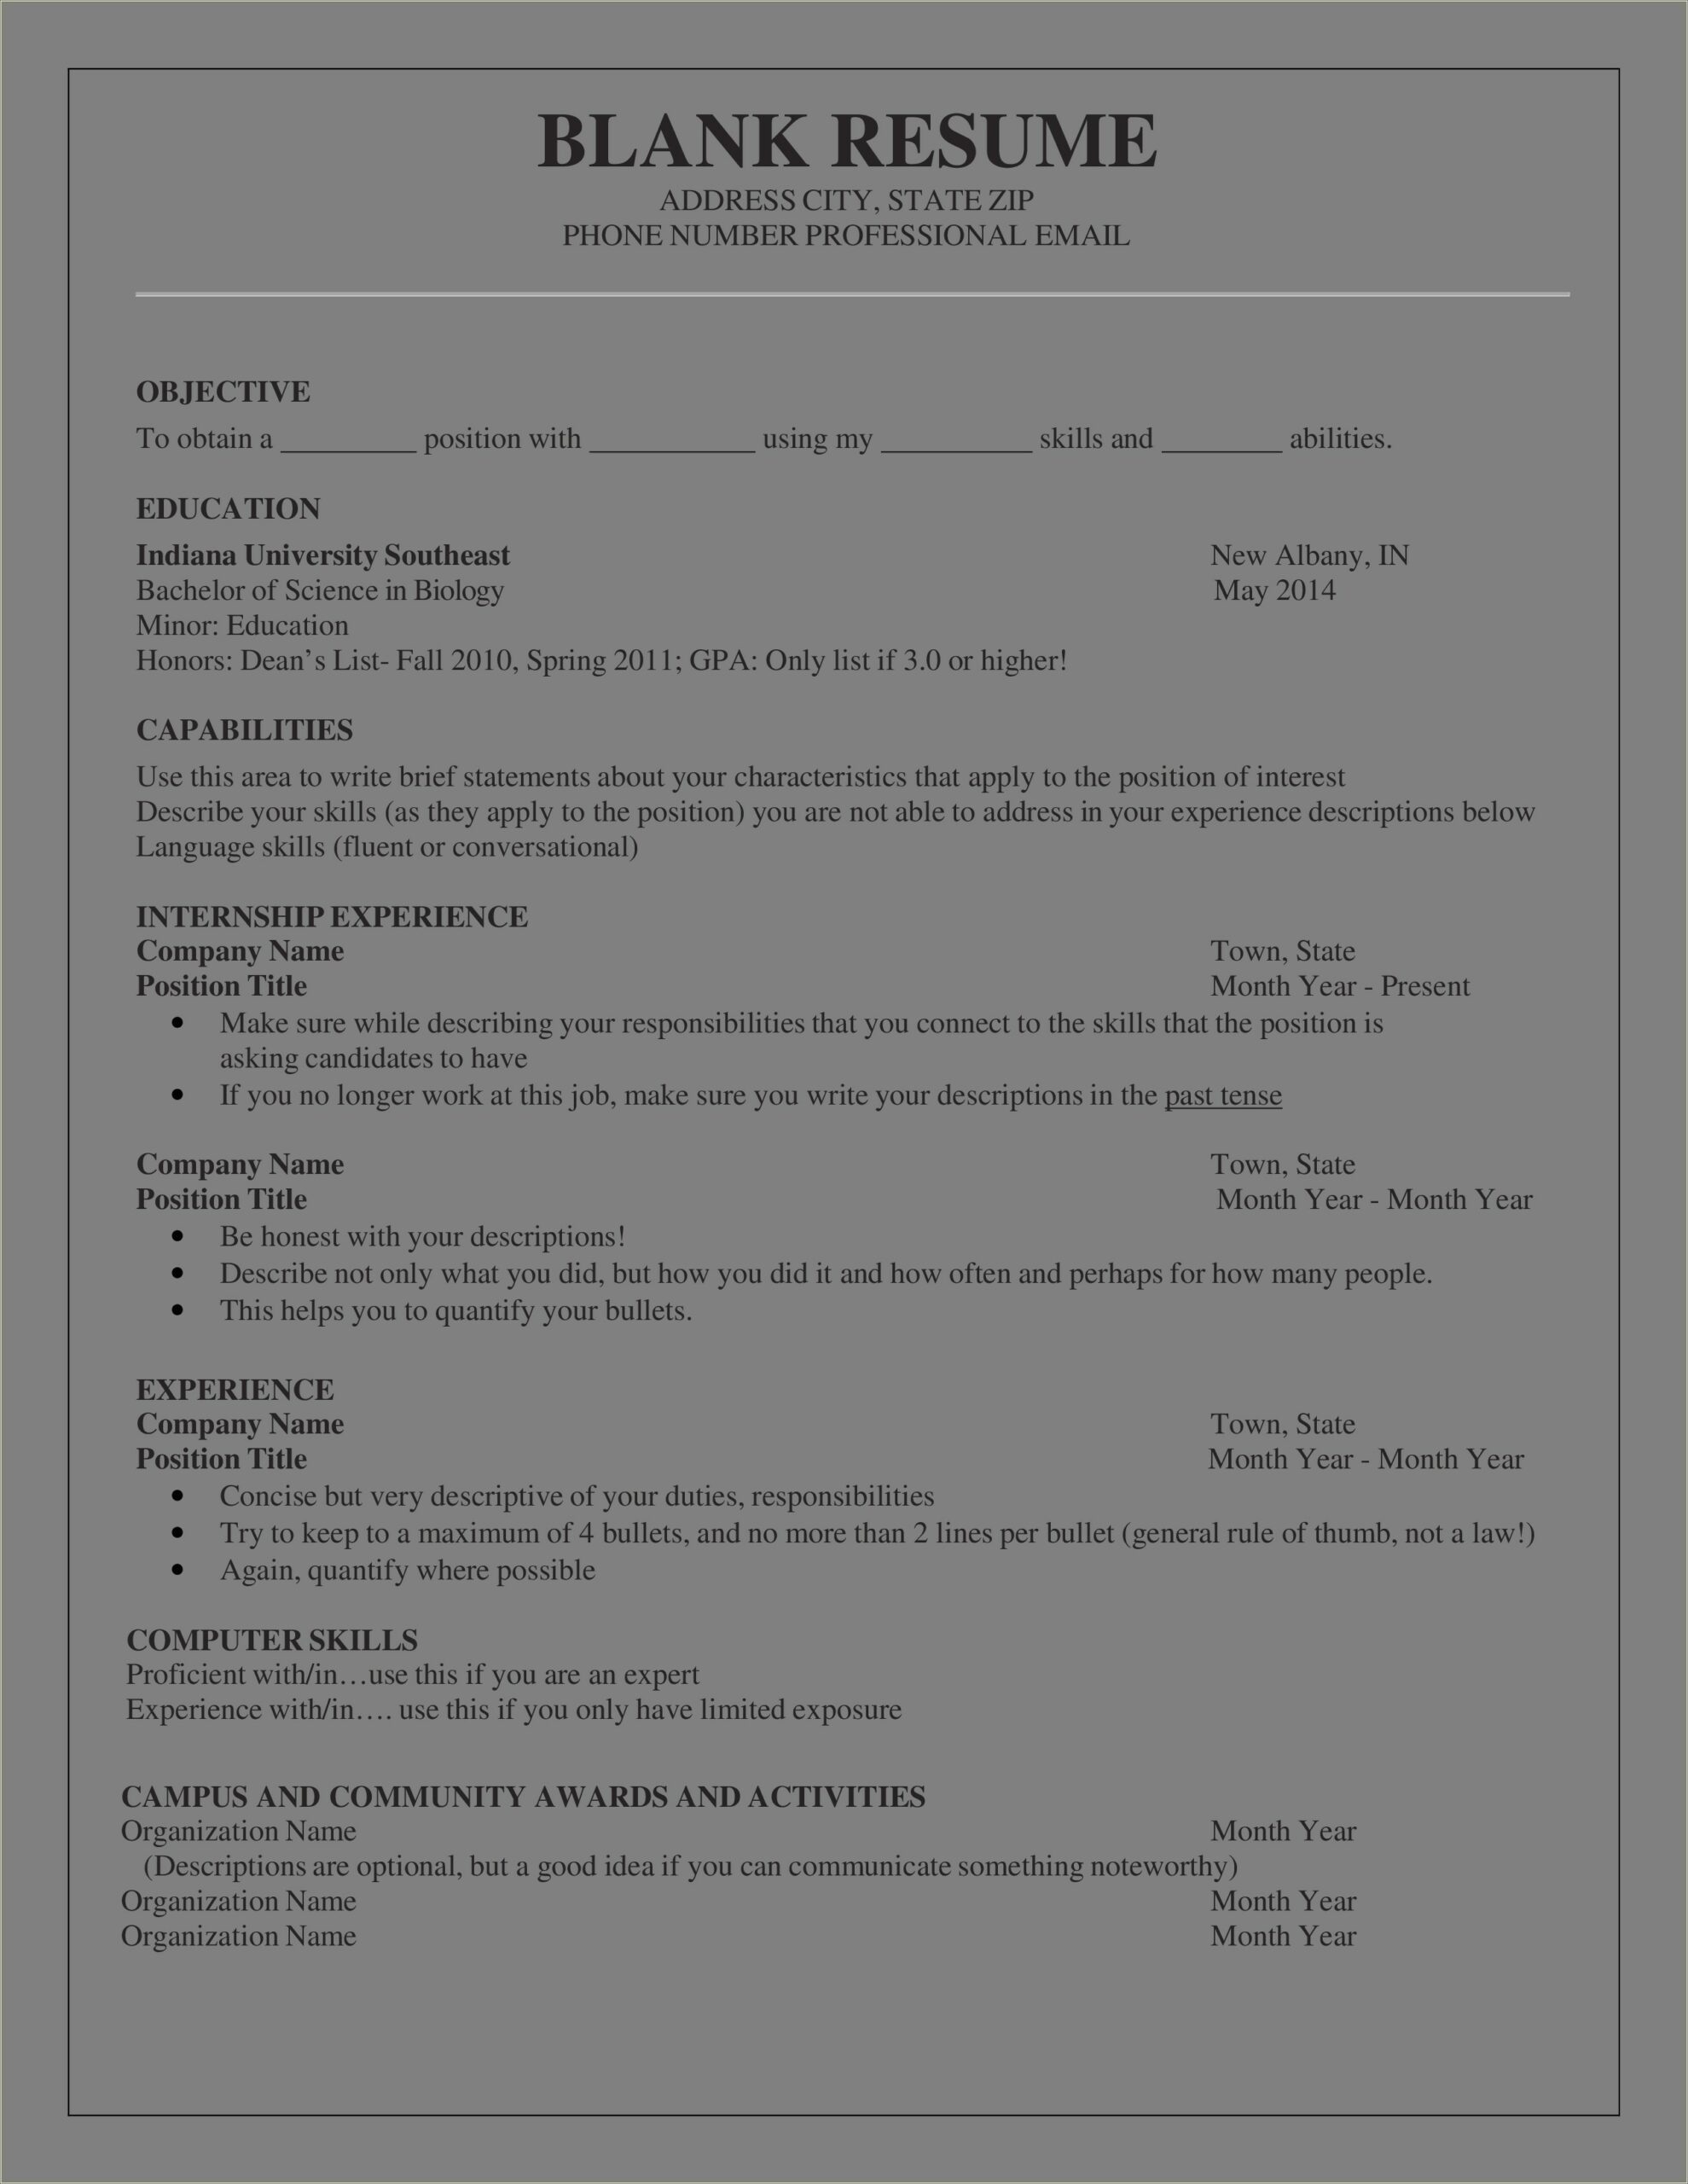 Honest Resume For Beginners With No Experience